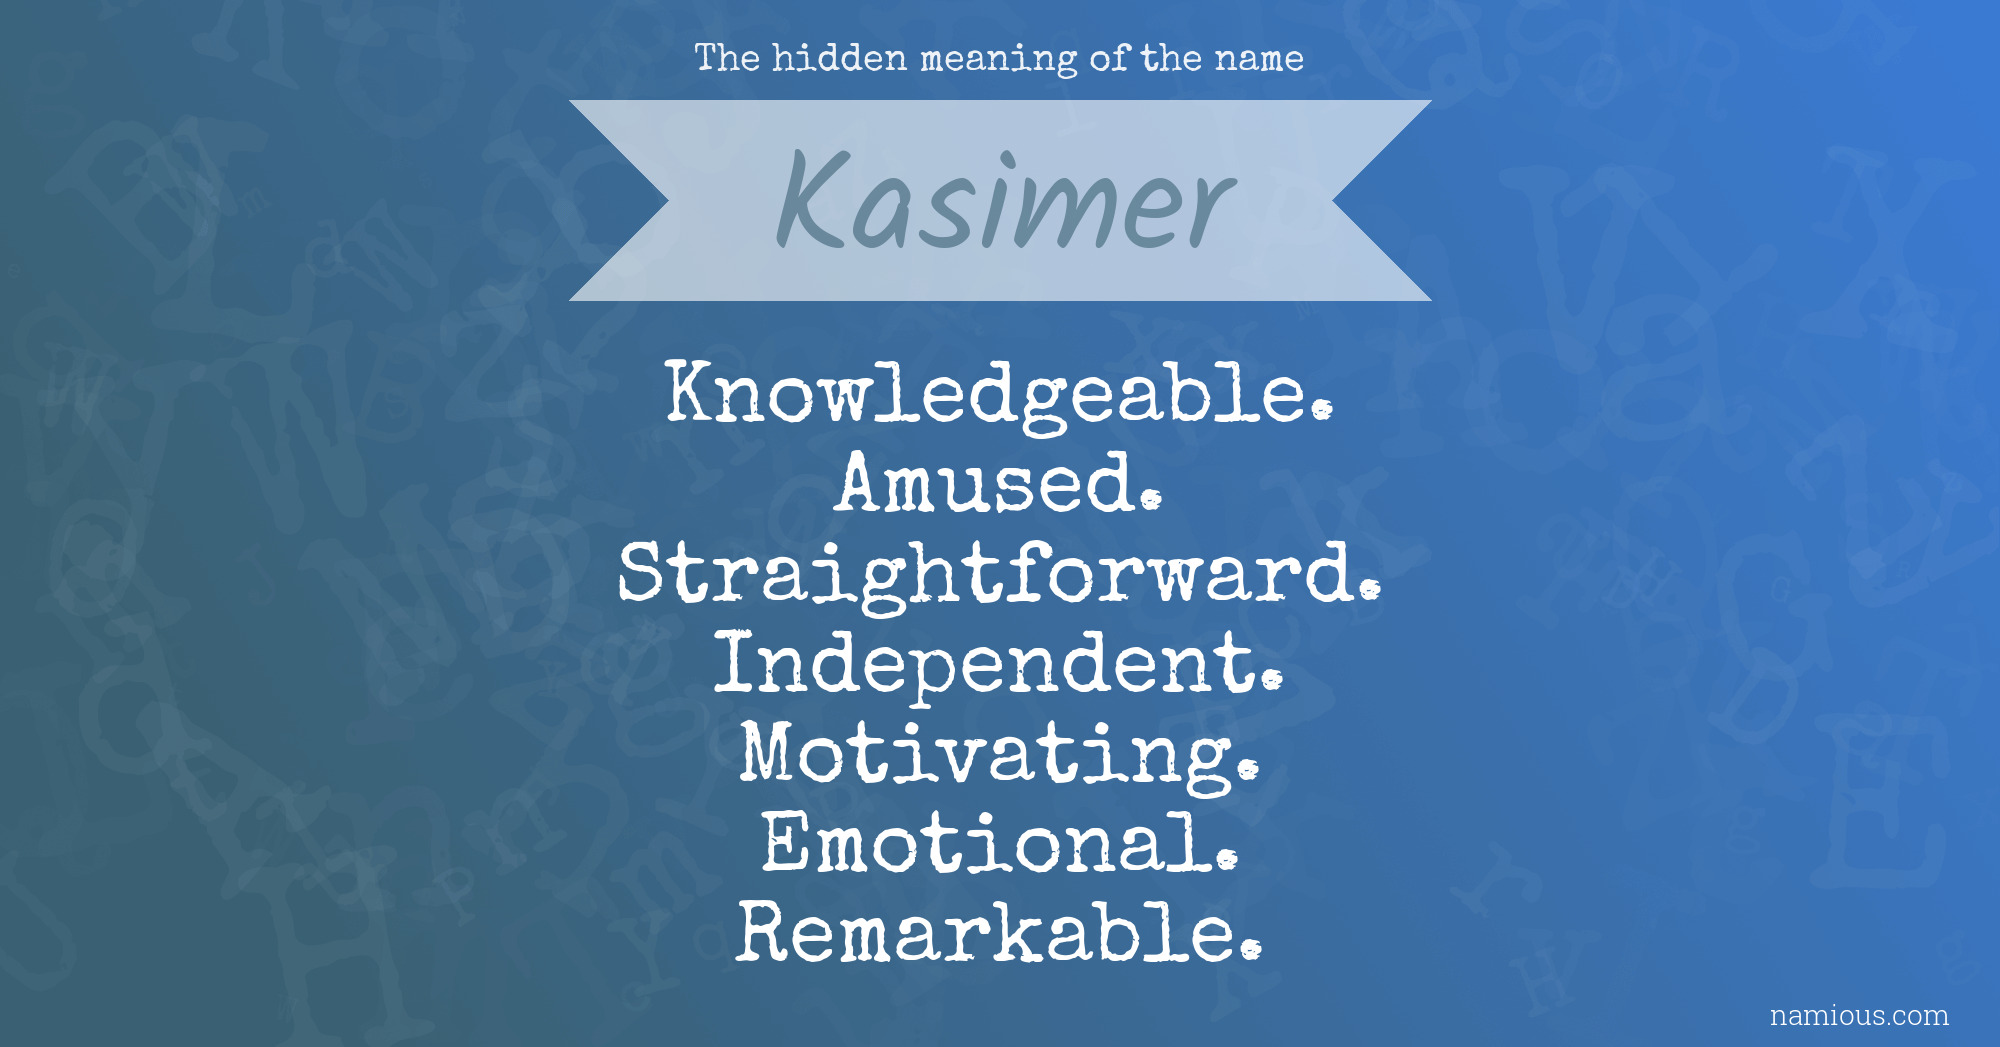 The hidden meaning of the name Kasimer